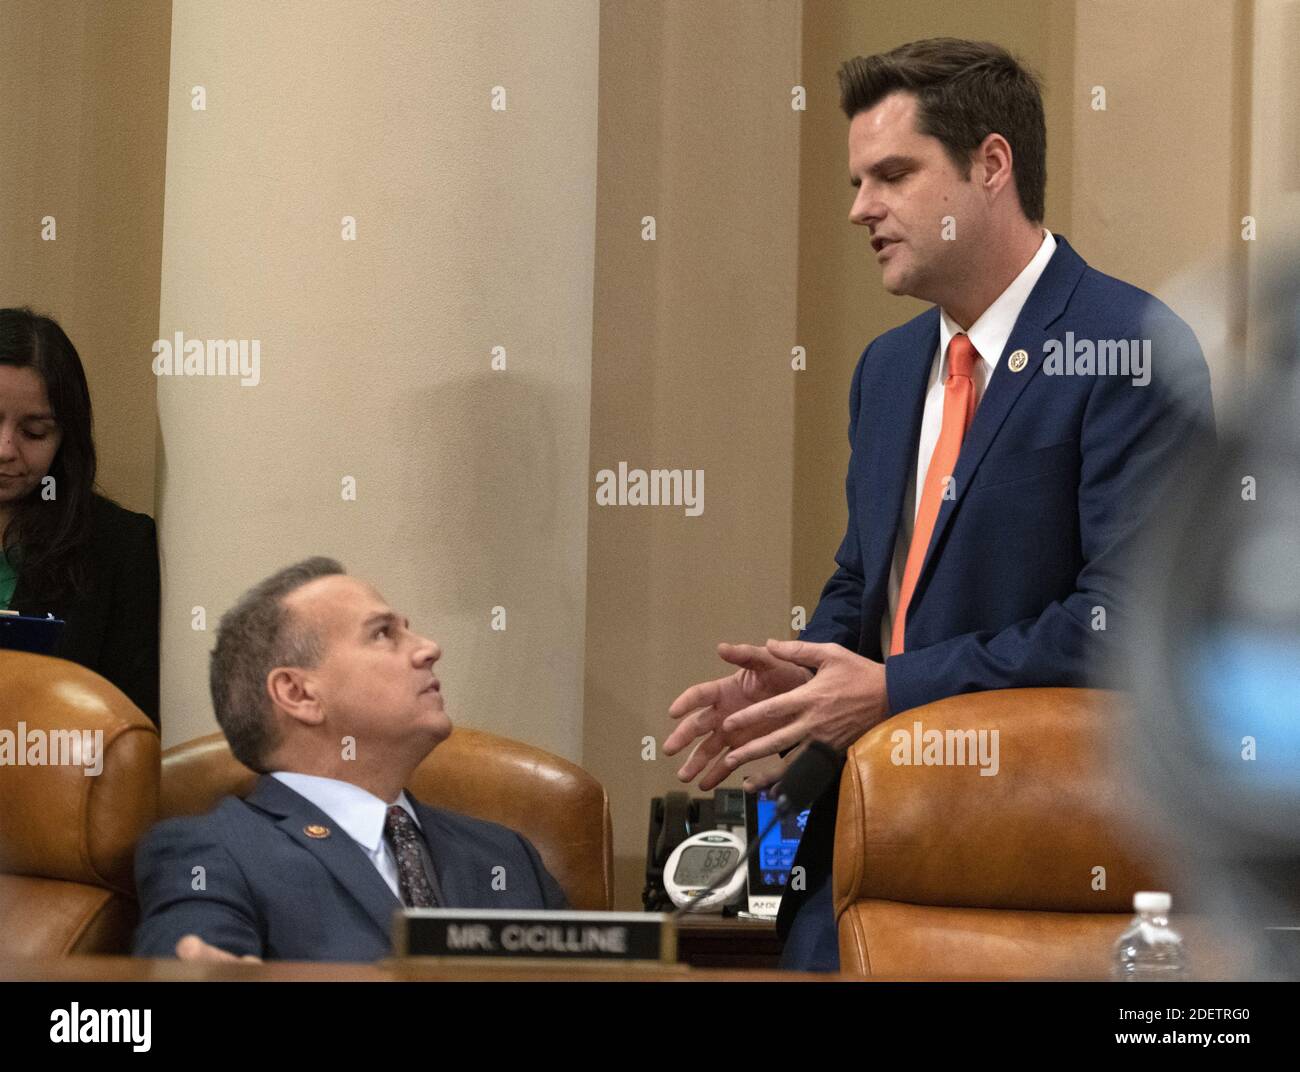 United States Representative David Cicilline (Democrat of Rhode Island), left, and US Representative Matt Gaetz (Republican of Florida), right, confer prior to hearing opening statements as the US House Committee on the Judiciary begins its markup of House Resolution 755, Articles of Impeachment Against President Donald J. Trump, in the Longworth House Office Building in Washington, DC, USA on Wednesday, December 11, 2019. Photo by Ron Sachs/CNP/ABACAPRESS.COM Stock Photo